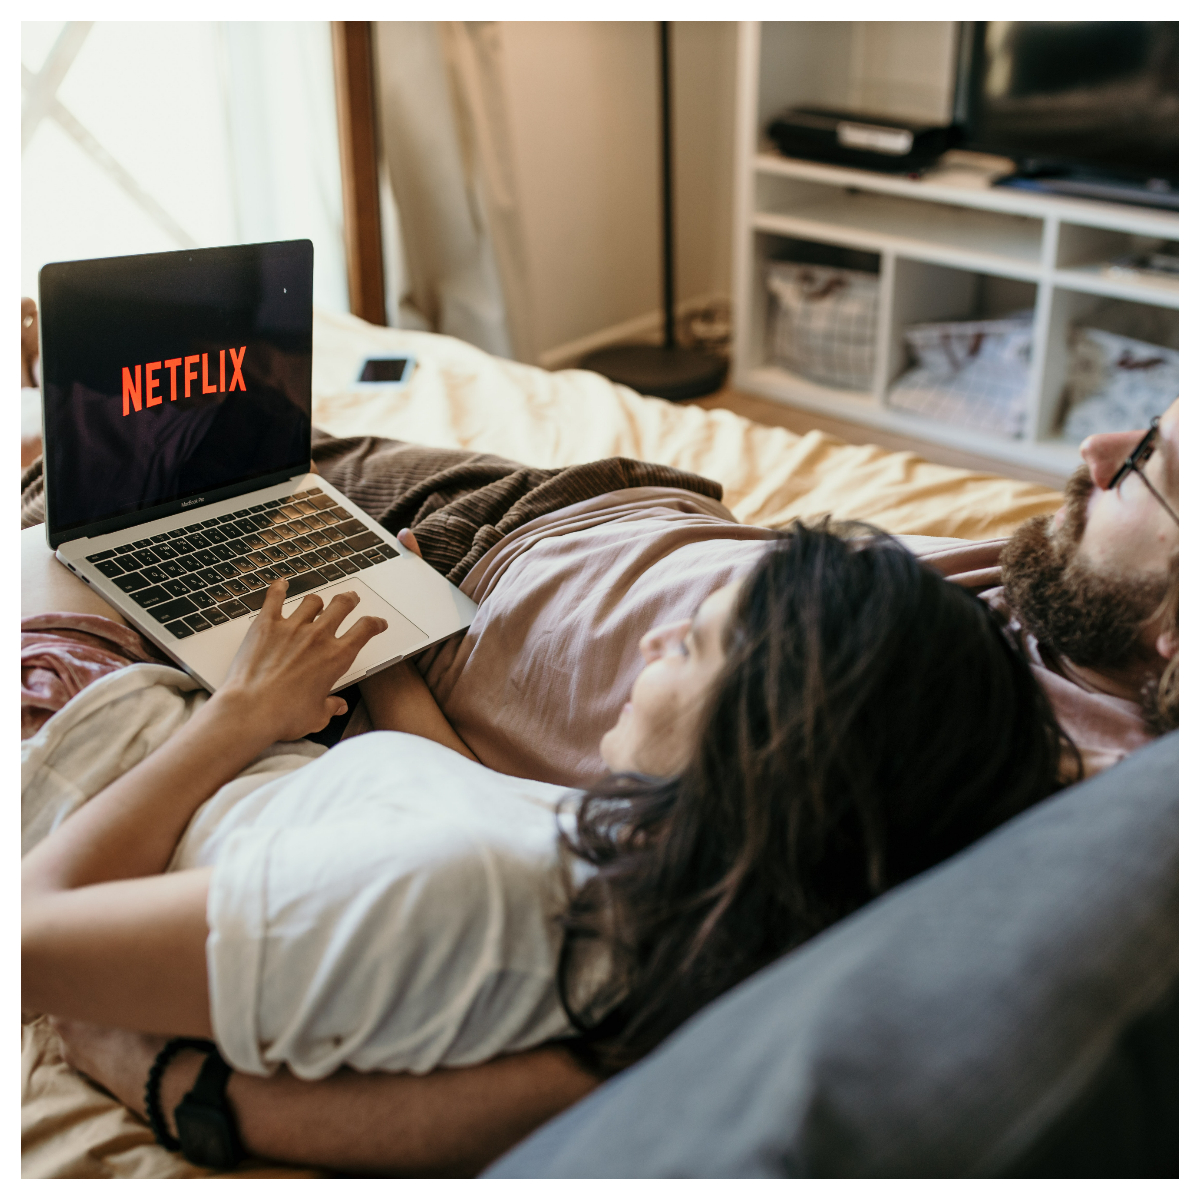 Best movies on Netflix, Top Netflix movies to watch right now 